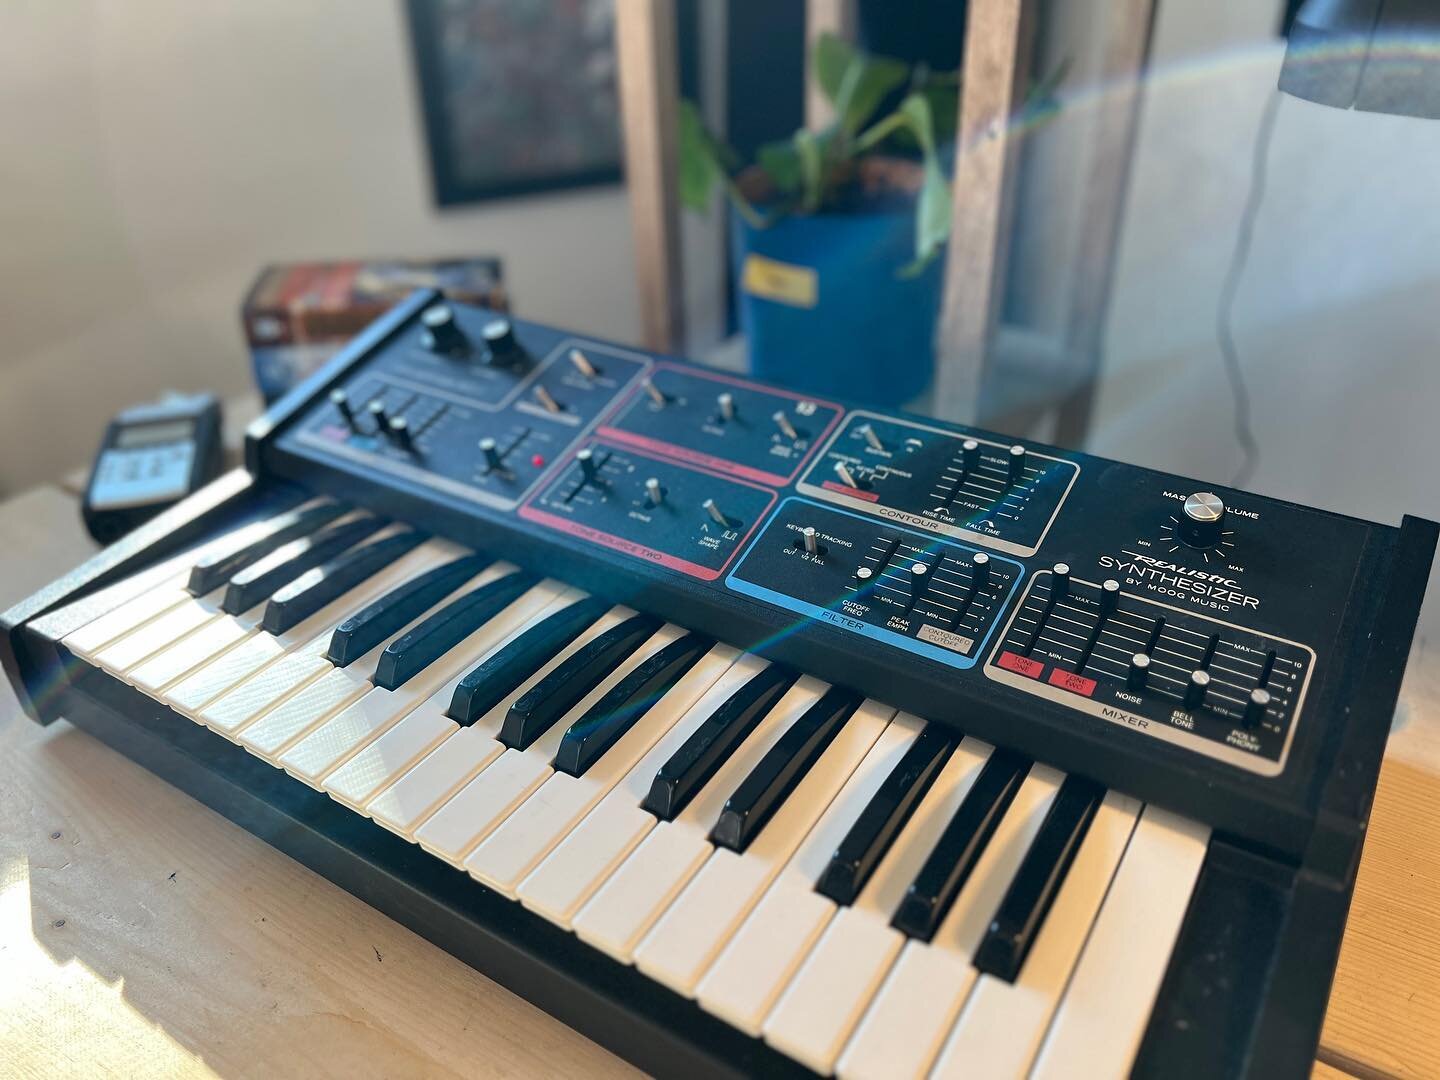 Finished Phase 1 of the Moog Realistic restoration. She&rsquo;s now very clean inside and out. The interior dust covers eventually break down into the dreaded Black Gunk (cool band name), and it was real gross. Swipe to look at some before/after pics